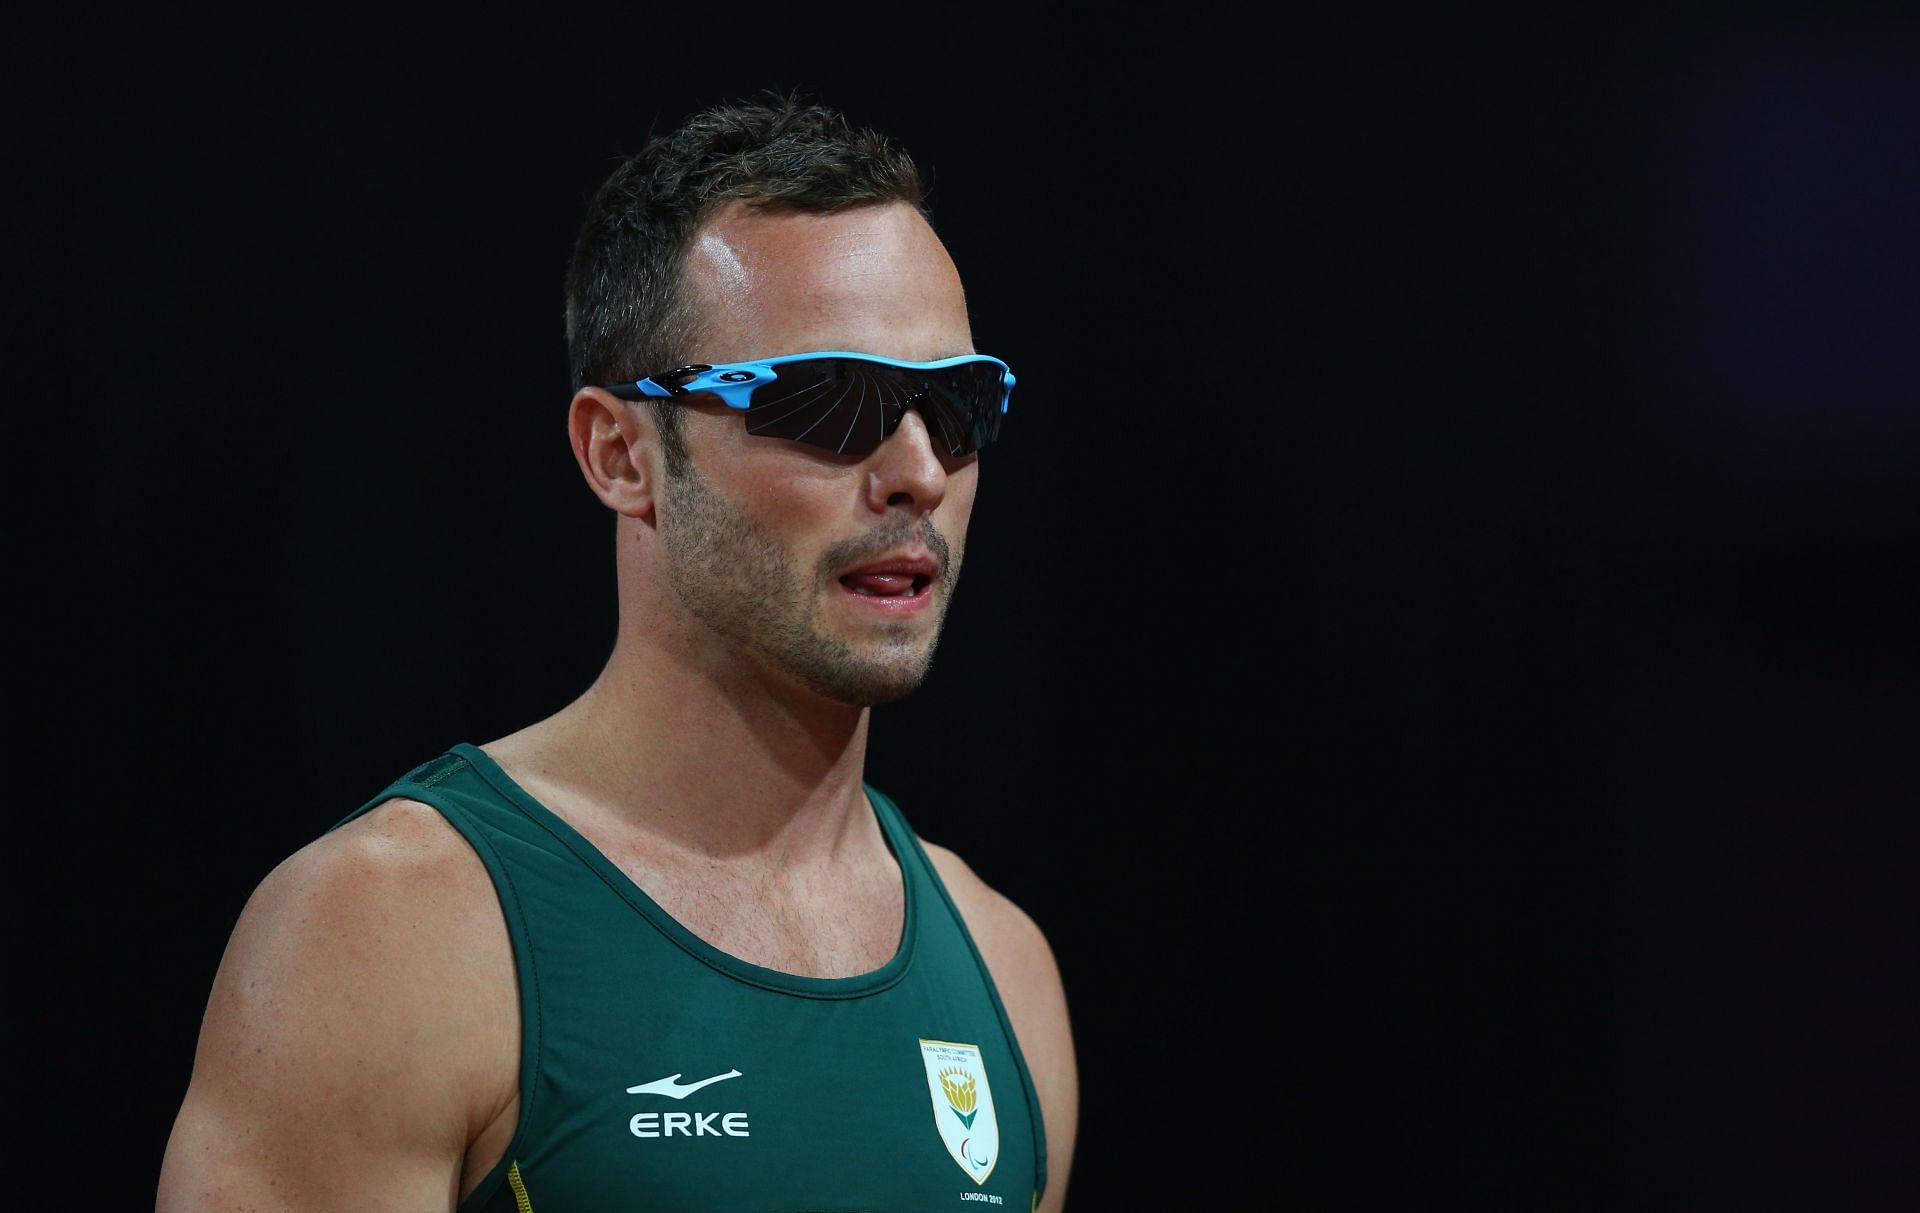 Oscar Pistorius of South Africa looks on before the Men&#039;s 400m T44 heats at the London 2012 Paralympic Games in London, England